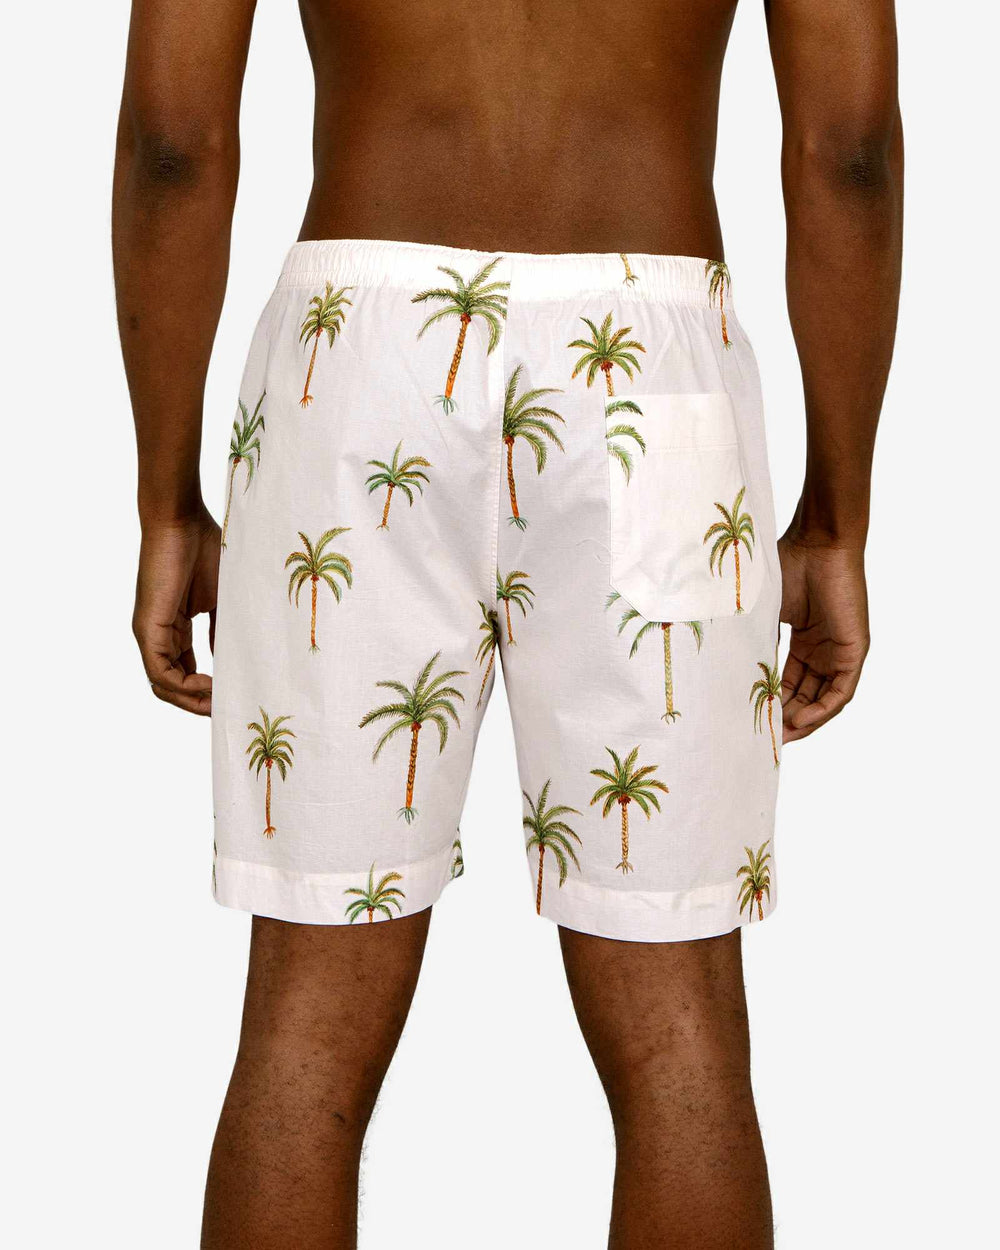 Mens lounge shorts with a palm tree pattern on a creme background